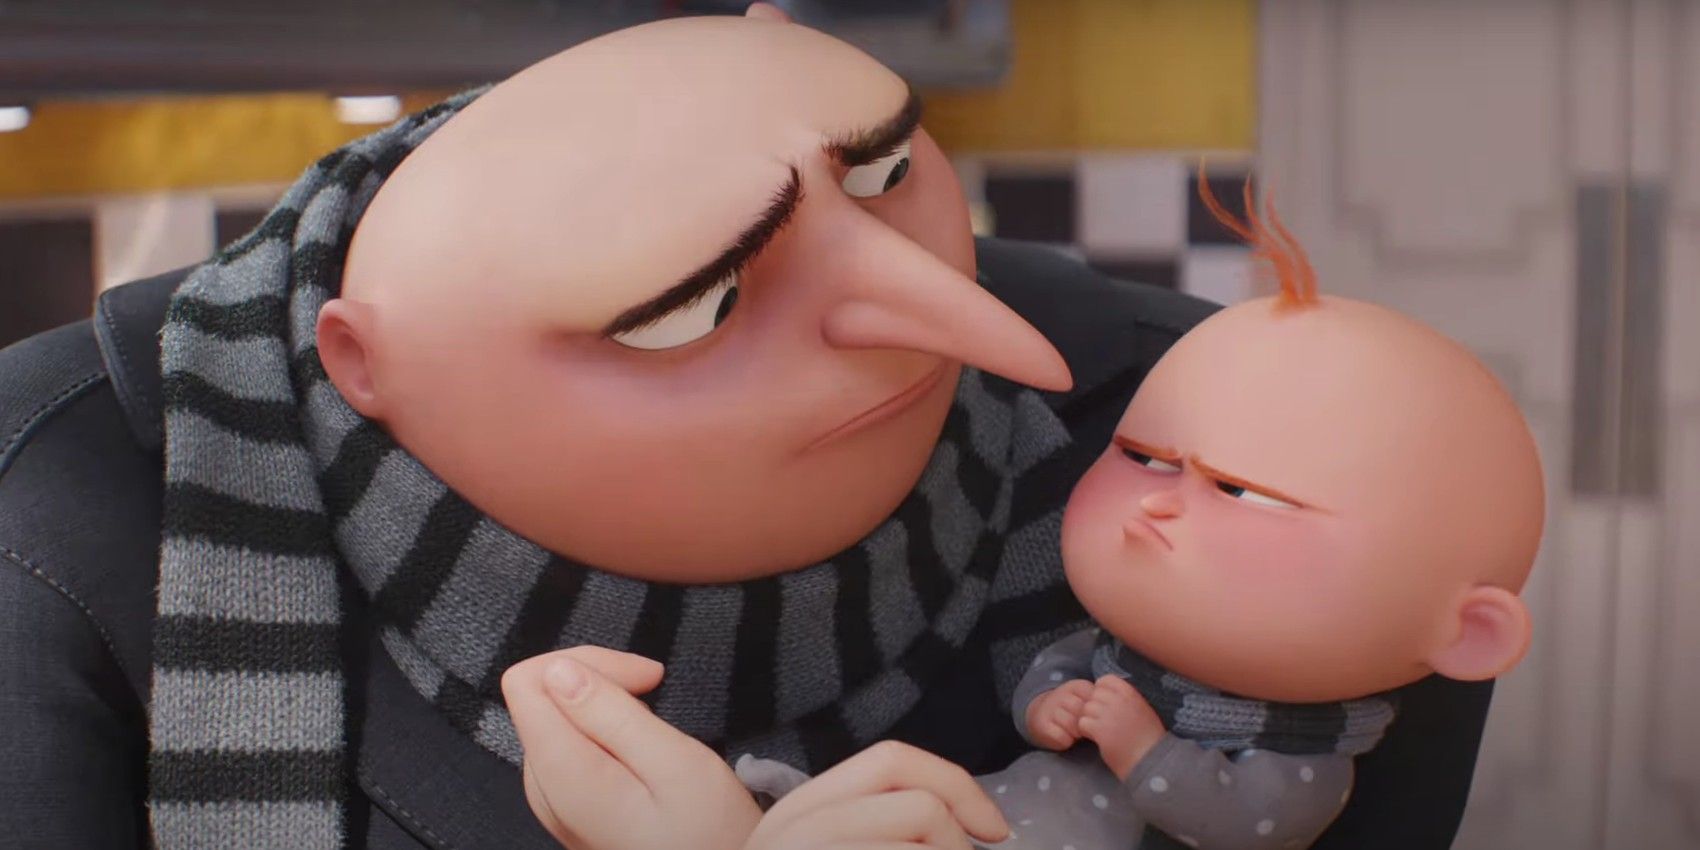 Minions: Rise of Gru' Is Now Streaming Online — Here's Where You Can Watch  It